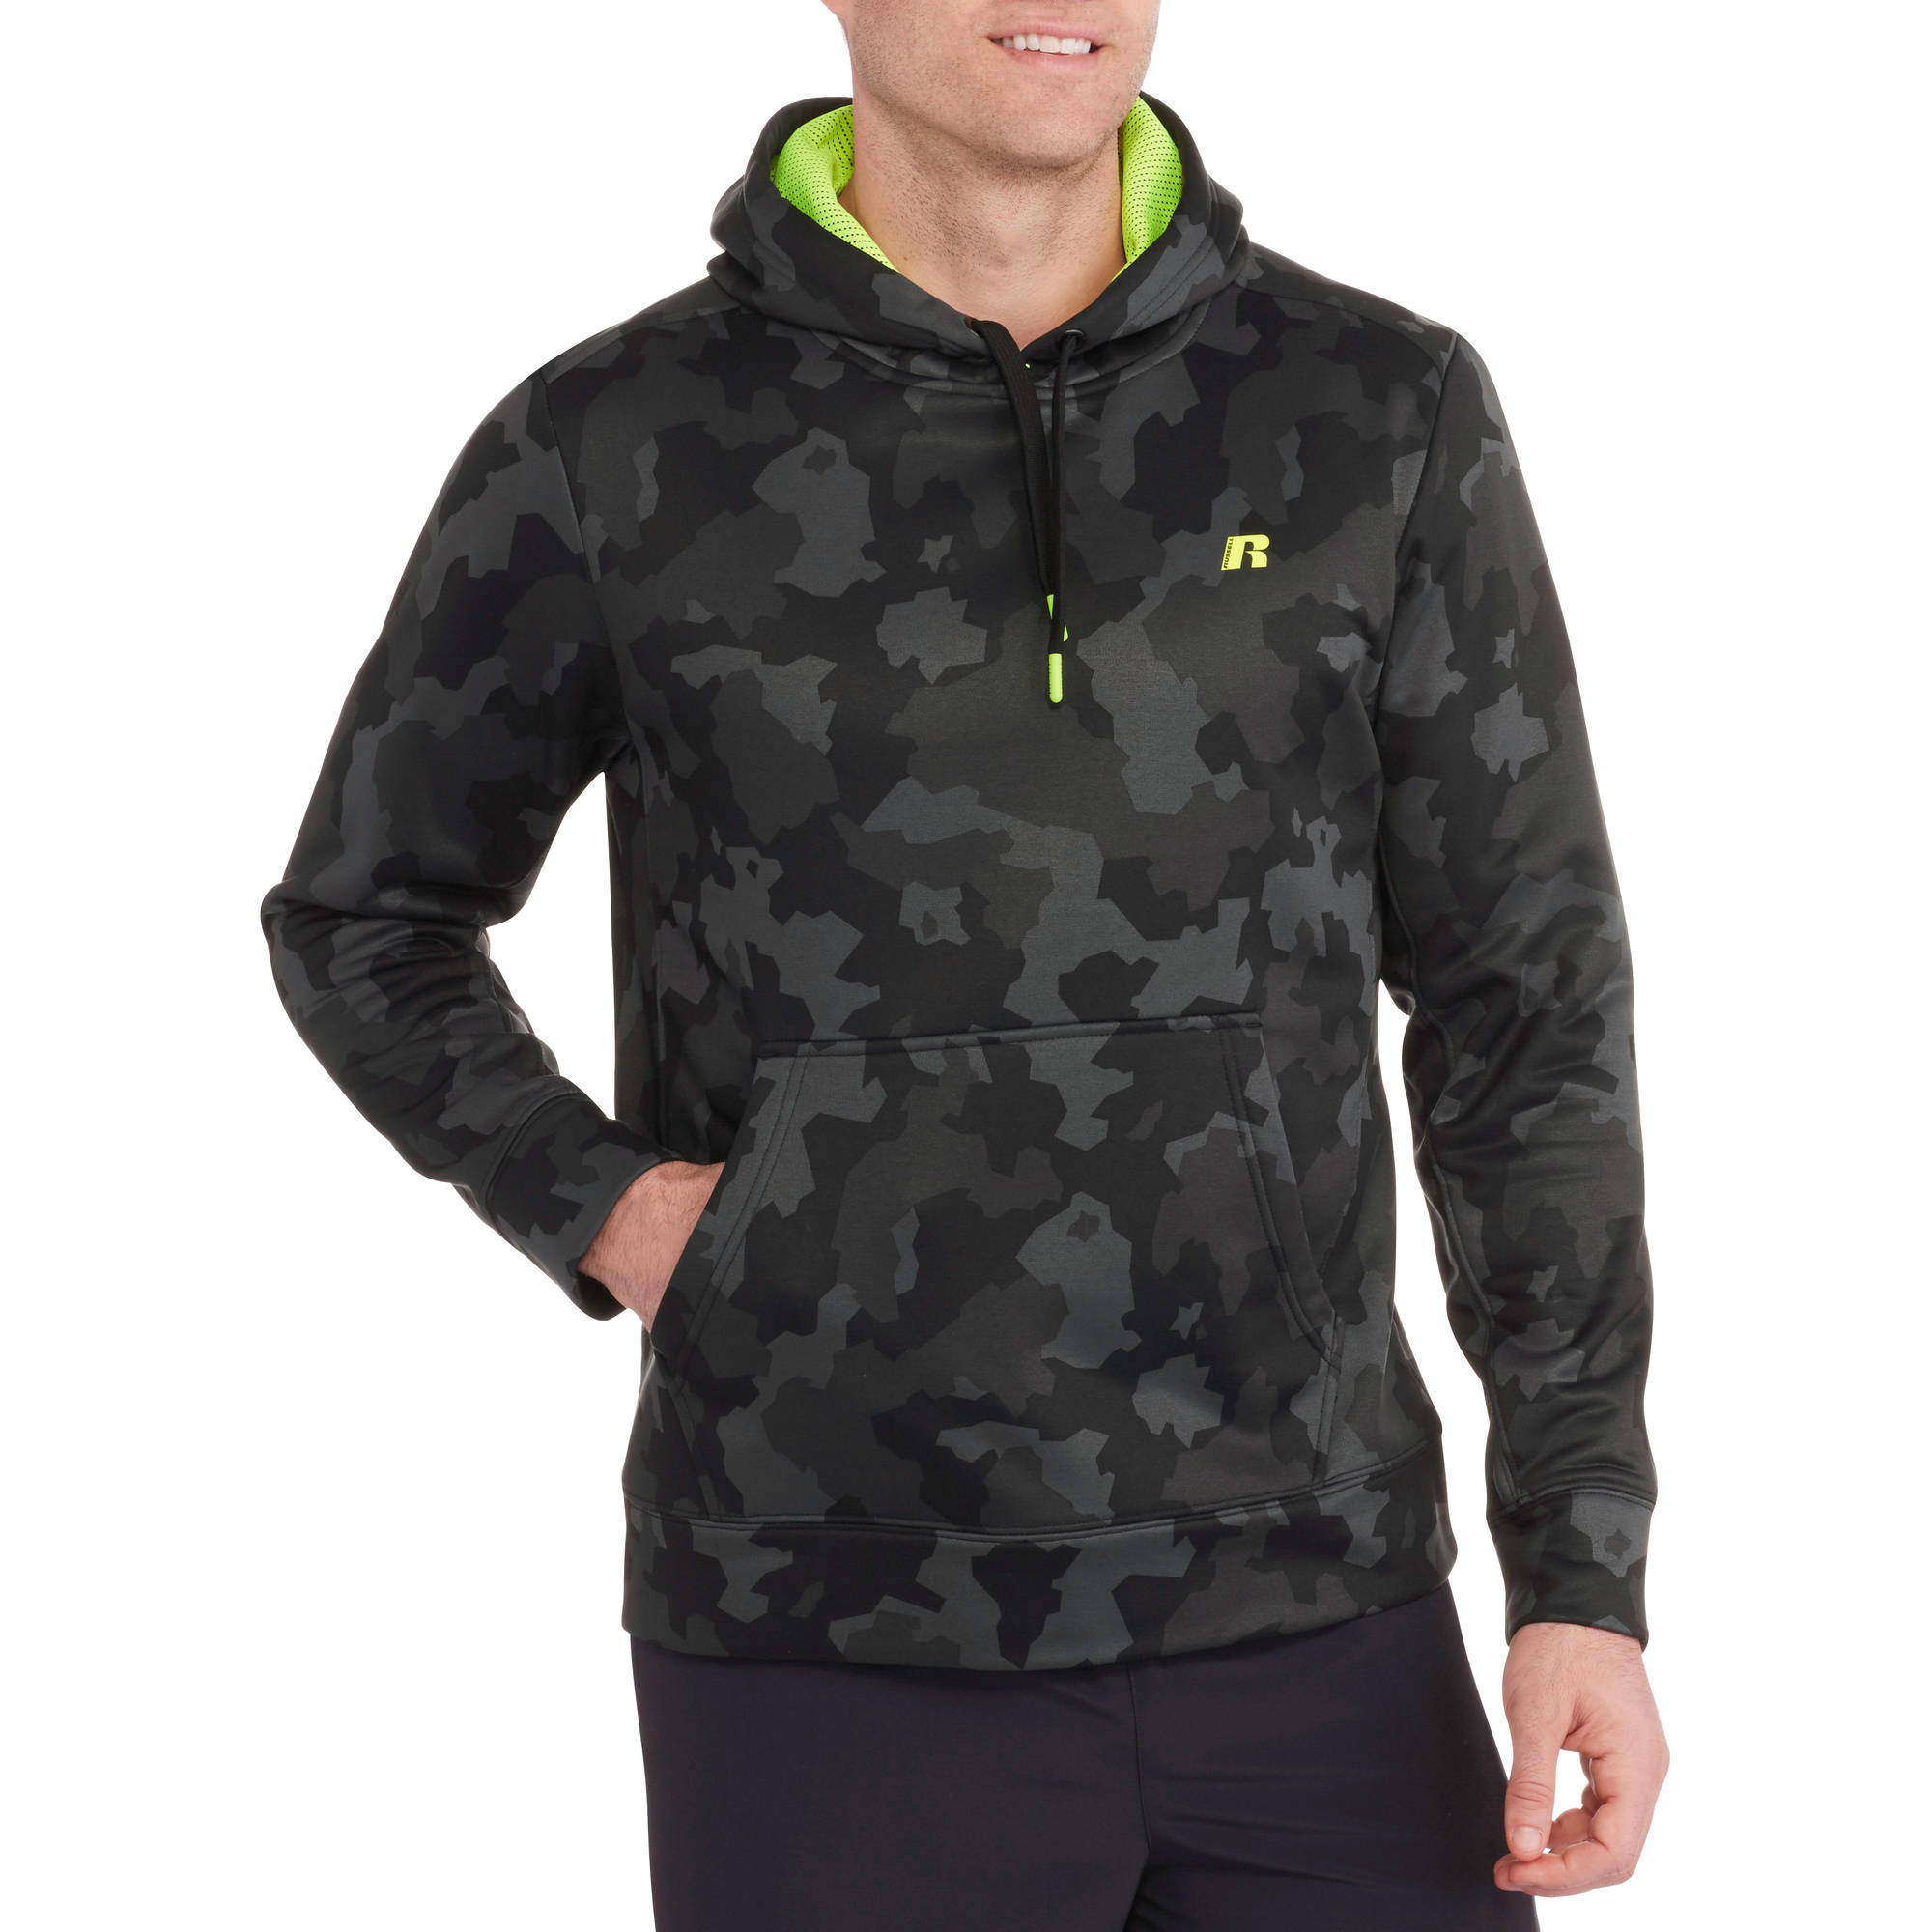 Men's Polytech Pullover - image 1 of 2